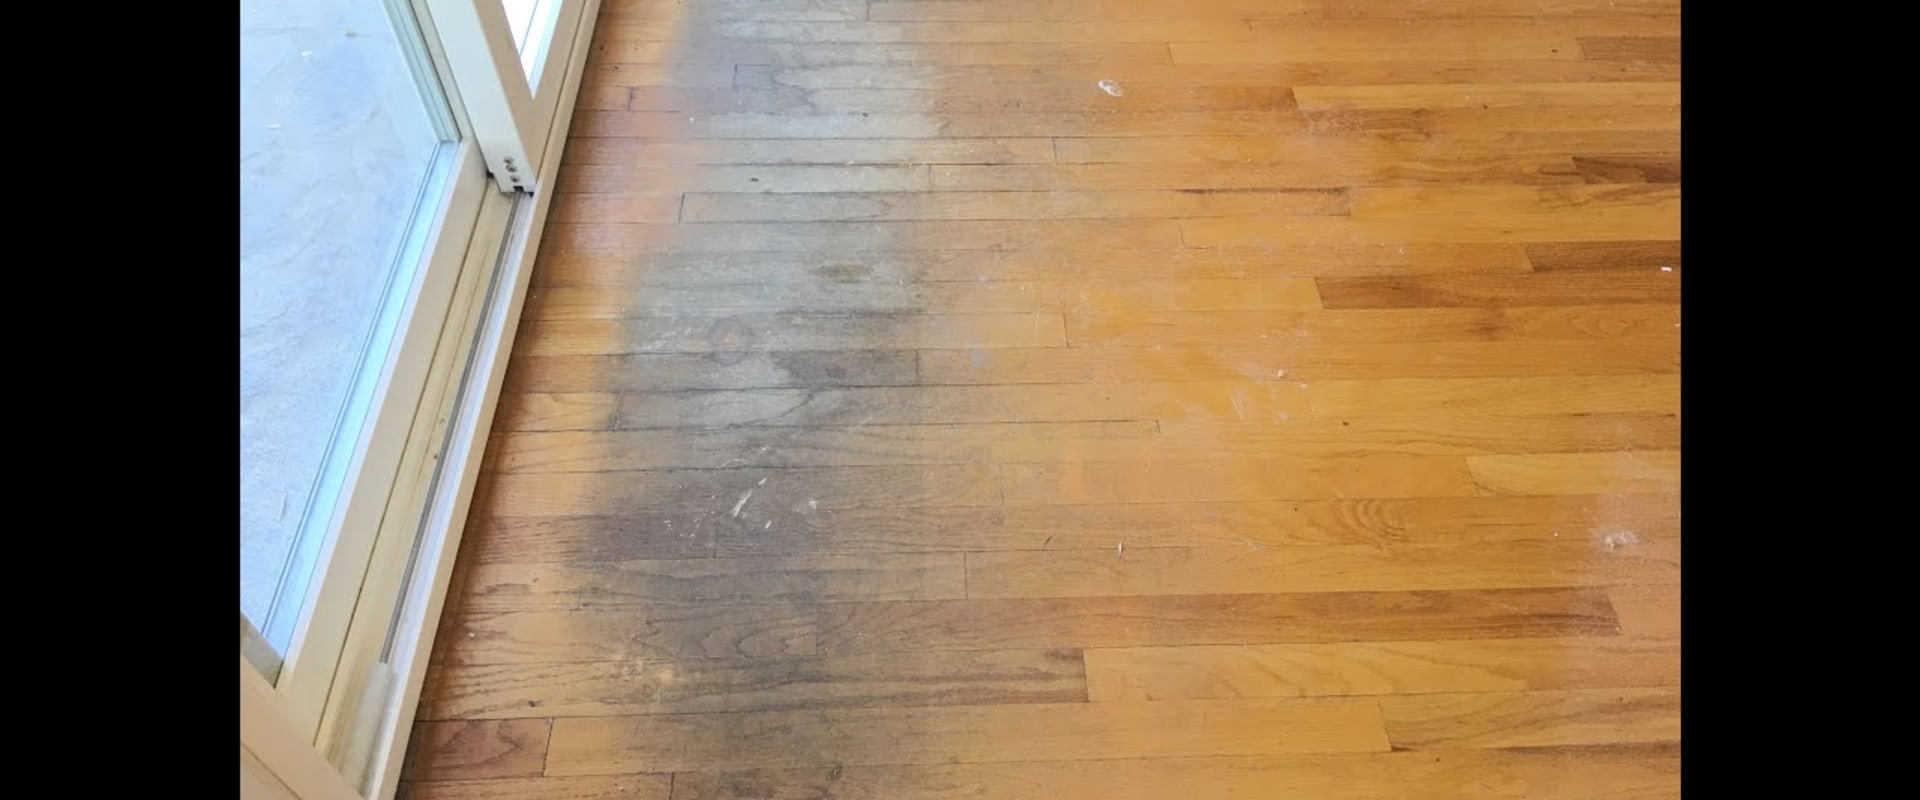 Can Damaged Wood Floors Be Refinished? - A Comprehensive Guide